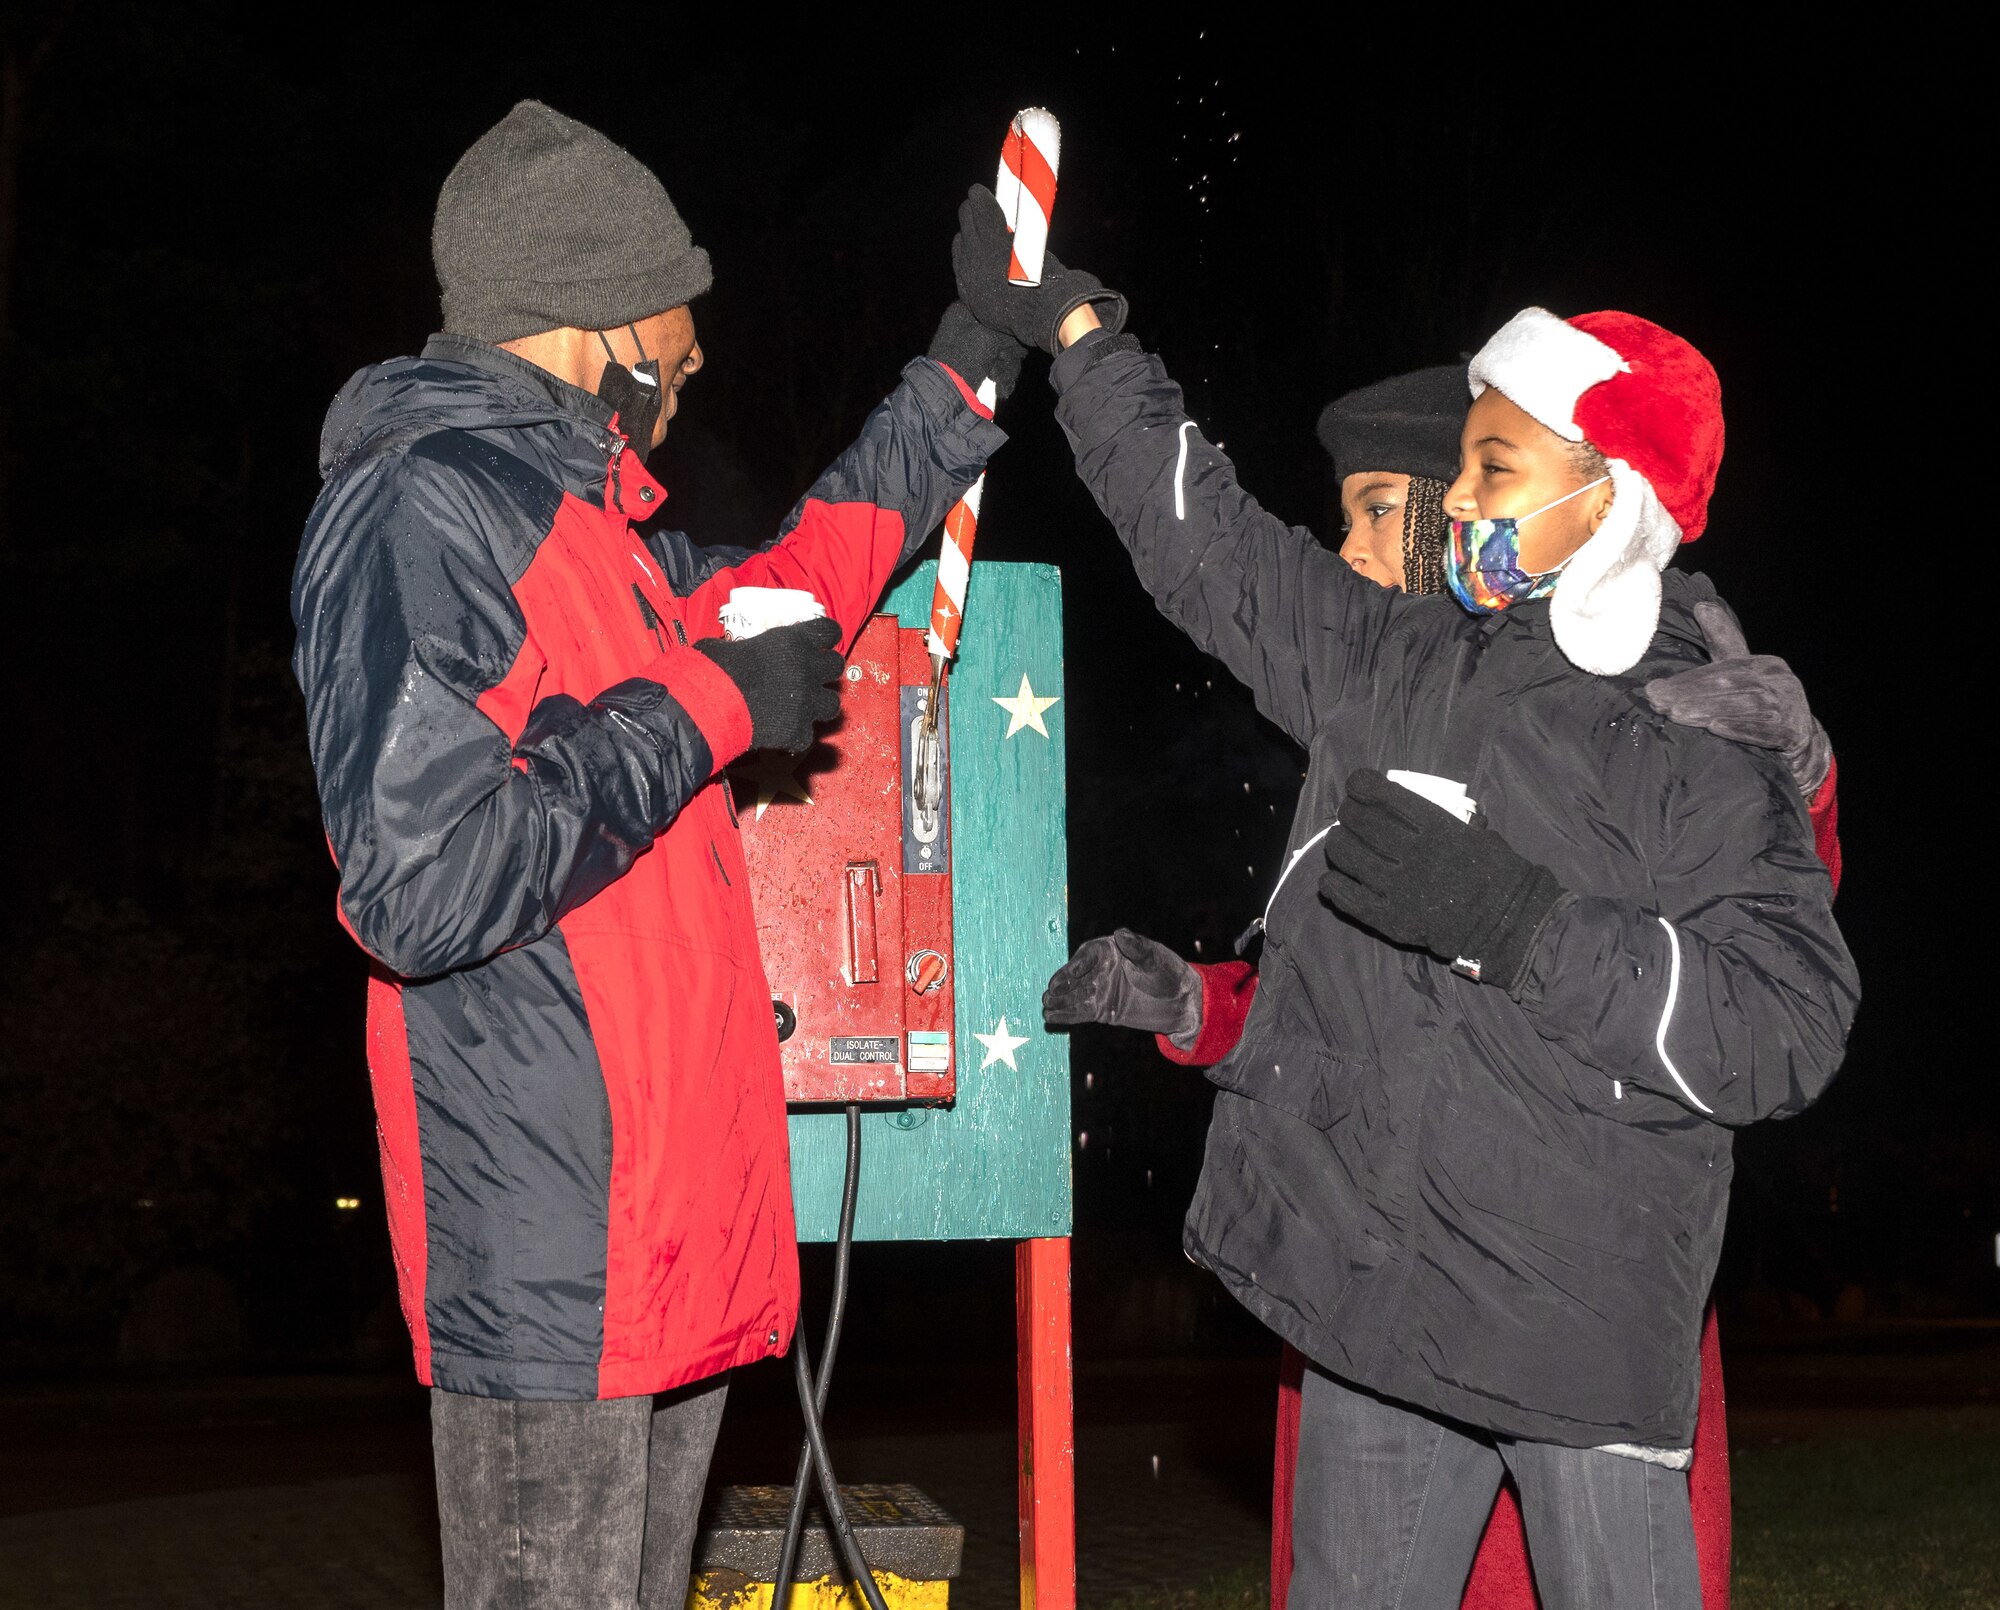 Family members of a deployed U.S. Air Force Airman flip a switch to turn on tree lights at Ramstein Air Base Germany Dec. 1, 2021. The honor of lighting the tree at Ramstein is reserved for family members of a deployed service member and help bring in the holiday season for those apart from loved ones. (U.S. Air Force photo by Senior Airman Thomas Karol)